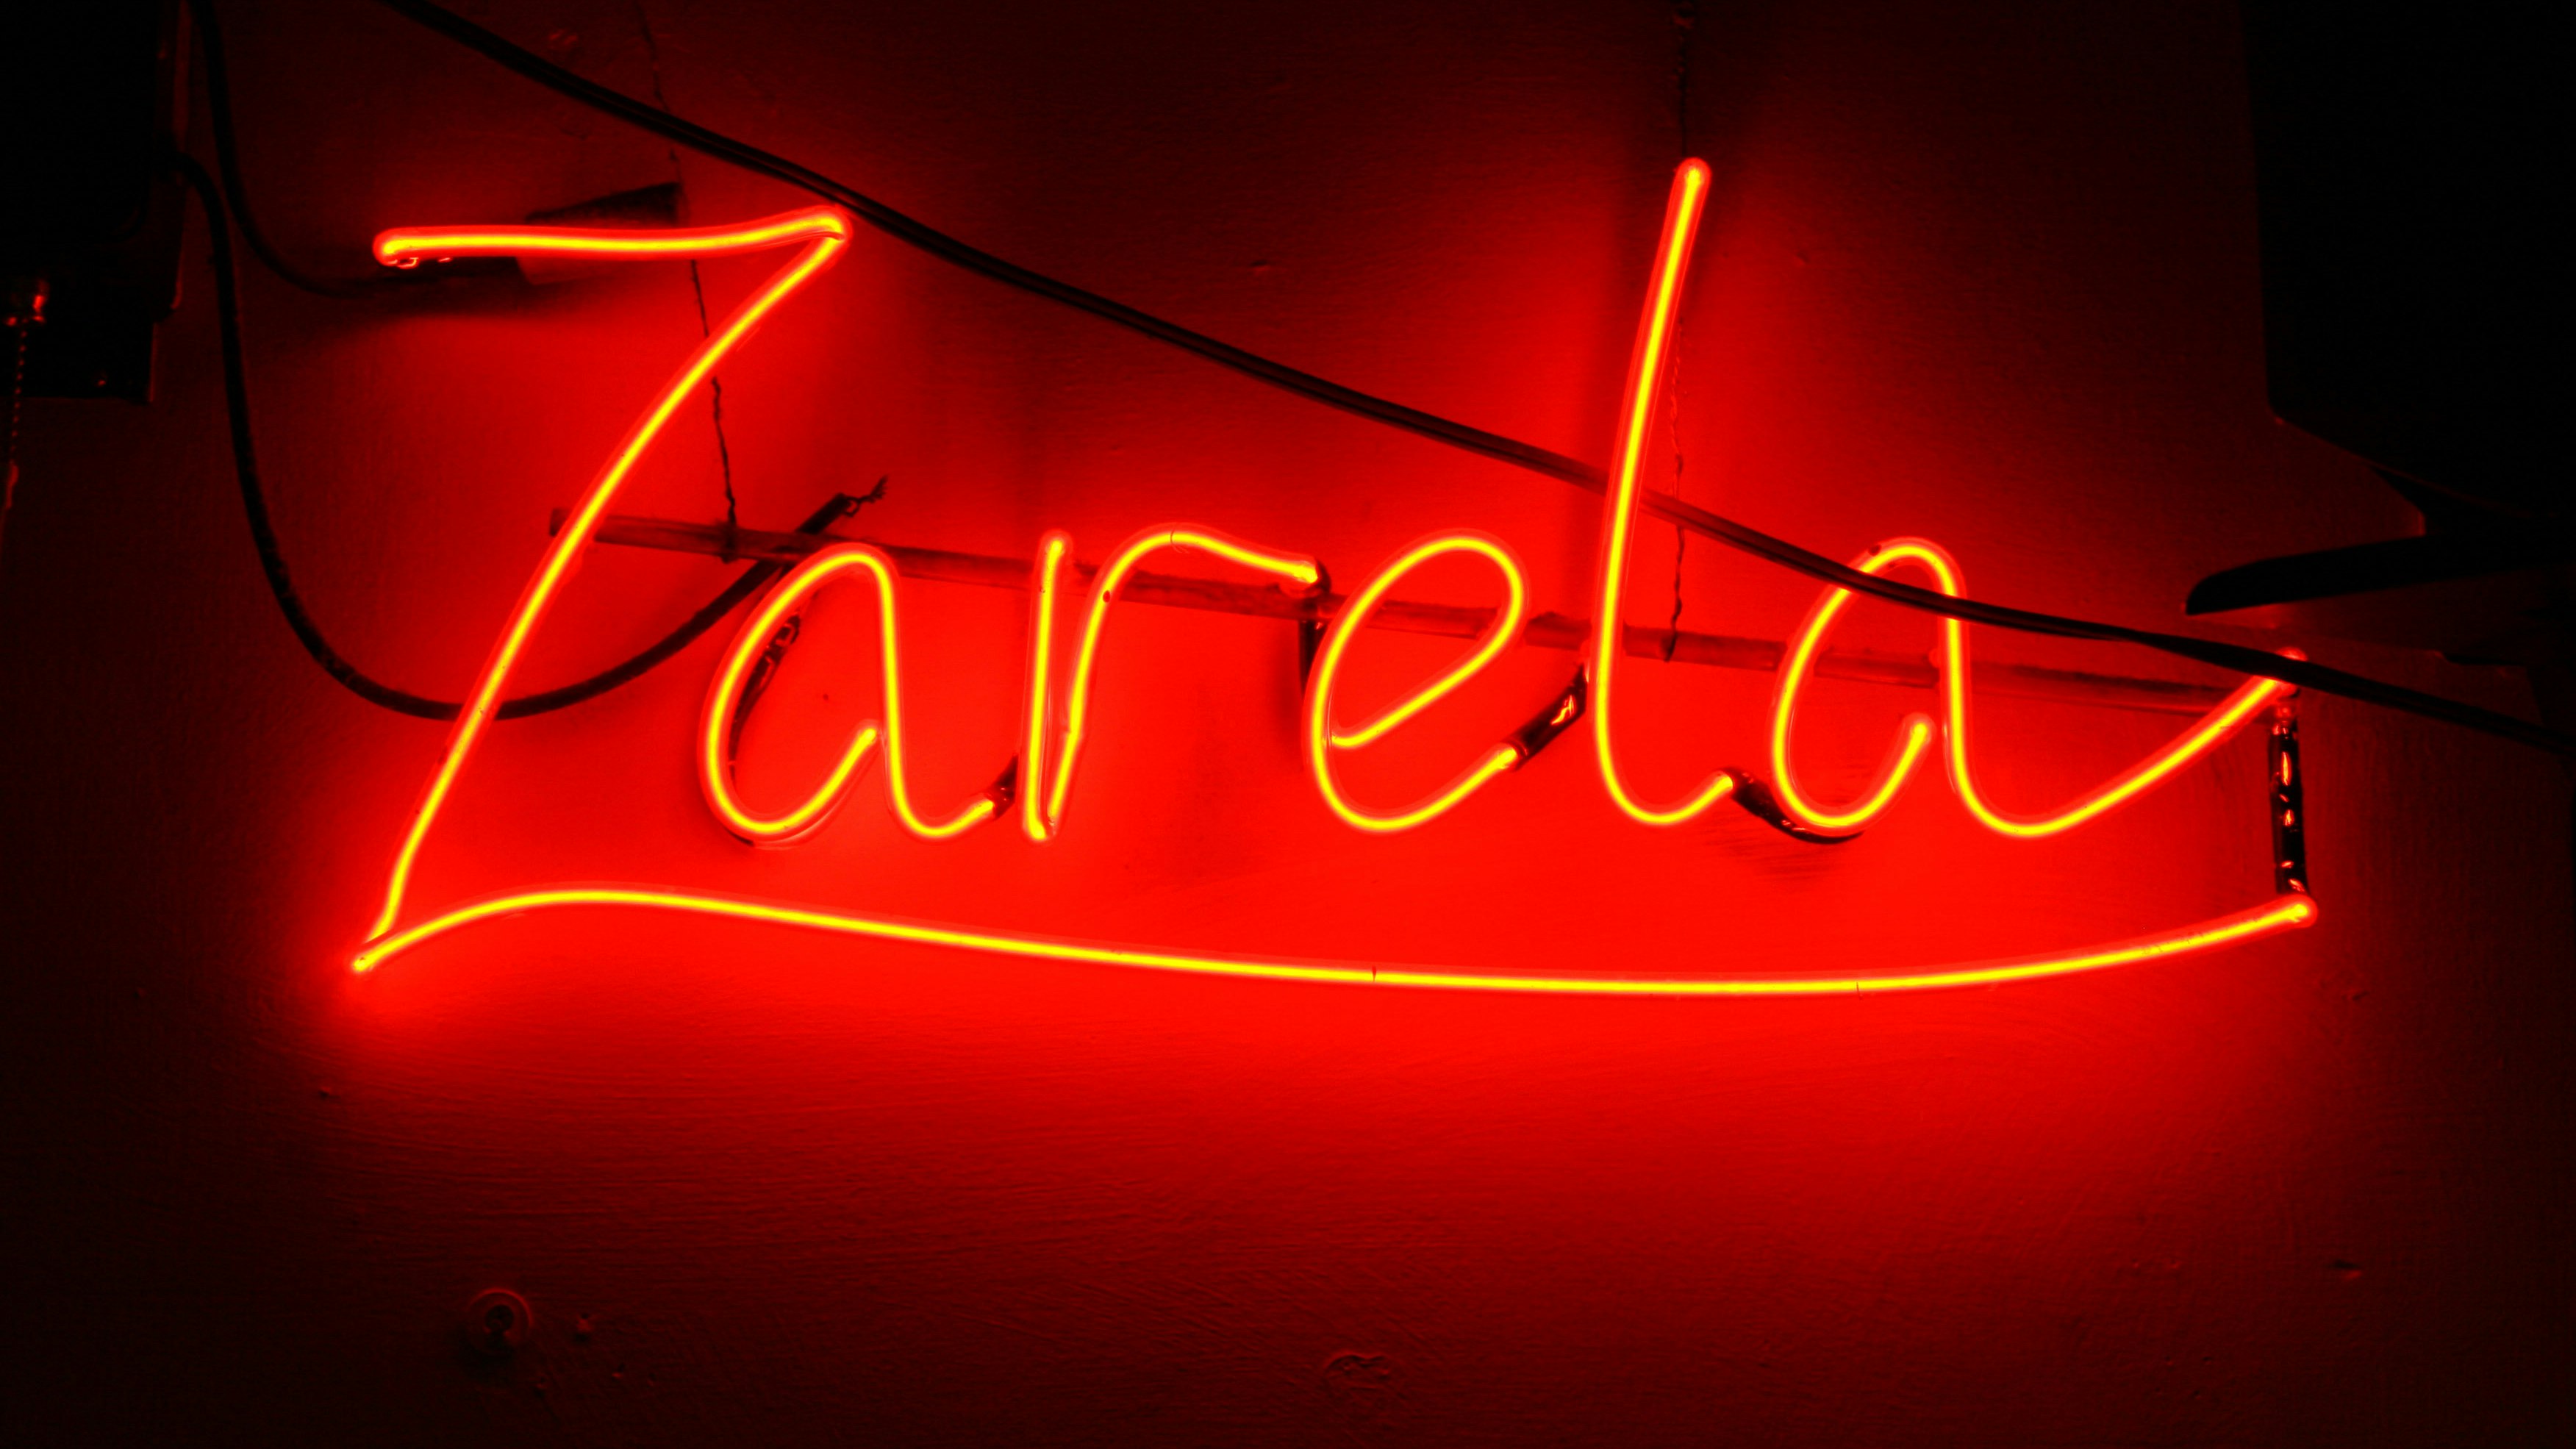 Neon sign in red, "Zarela"